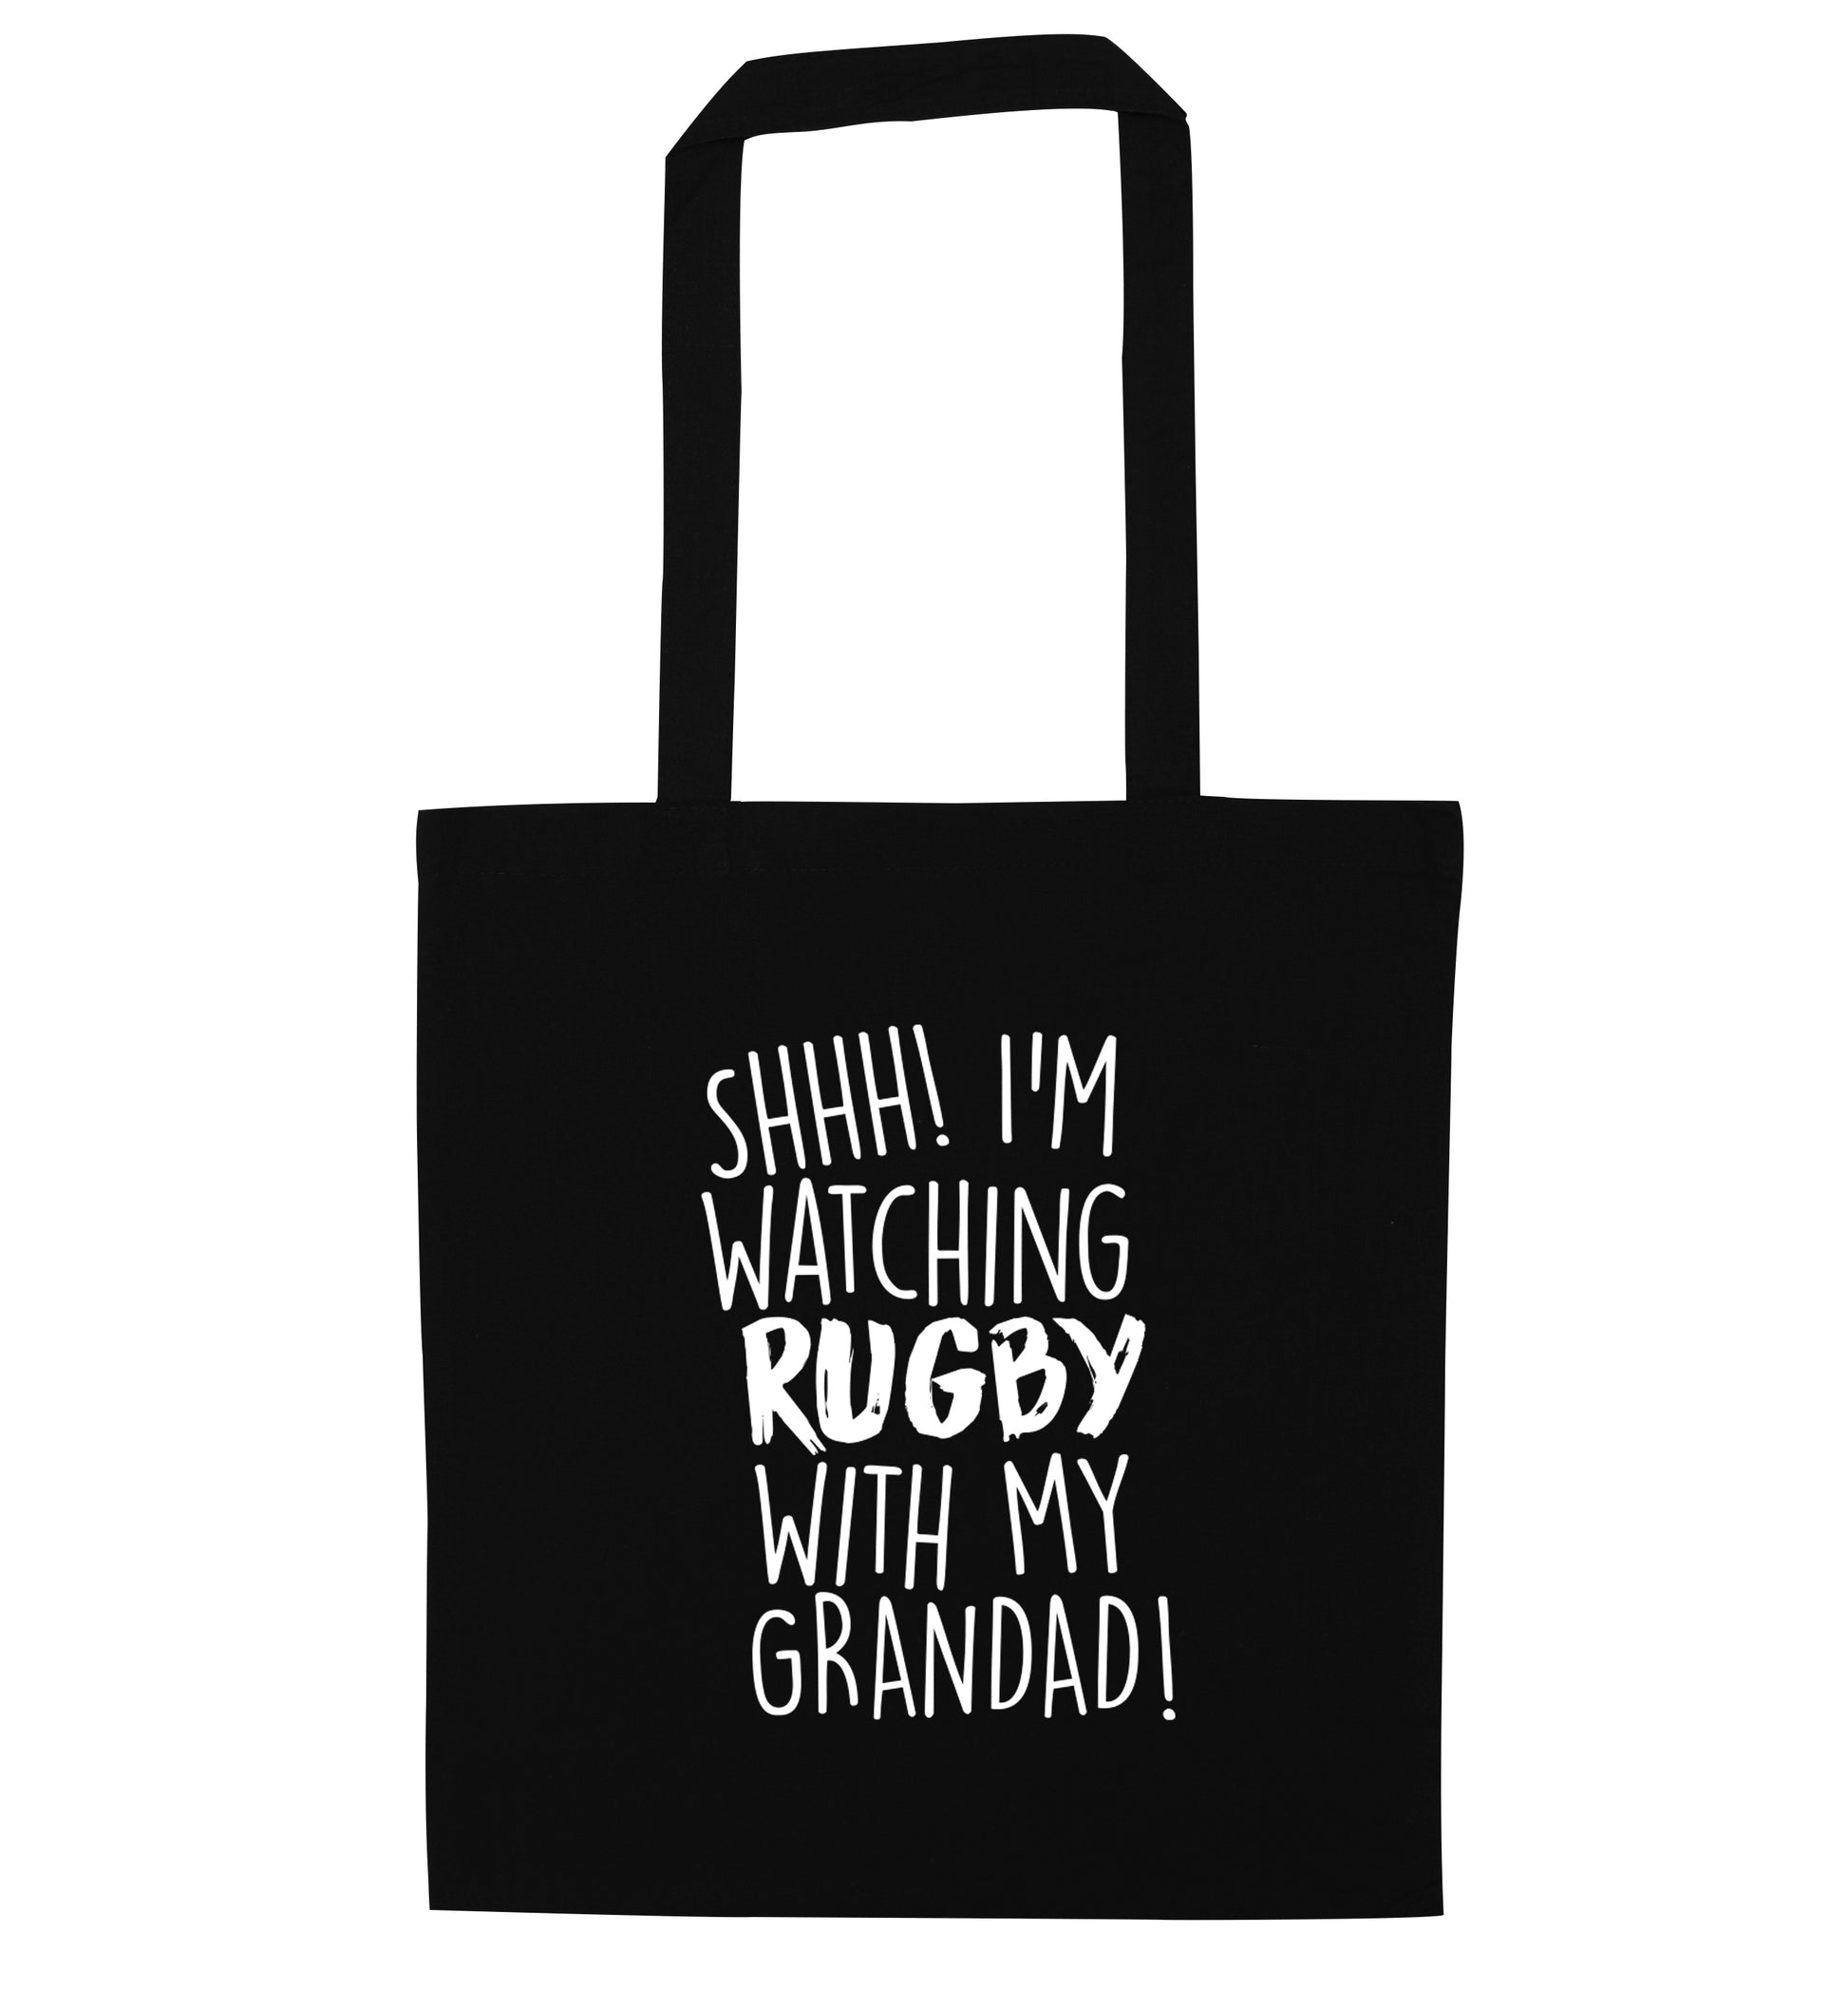 Shh I'm watching rugby with my grandaughter black tote bag